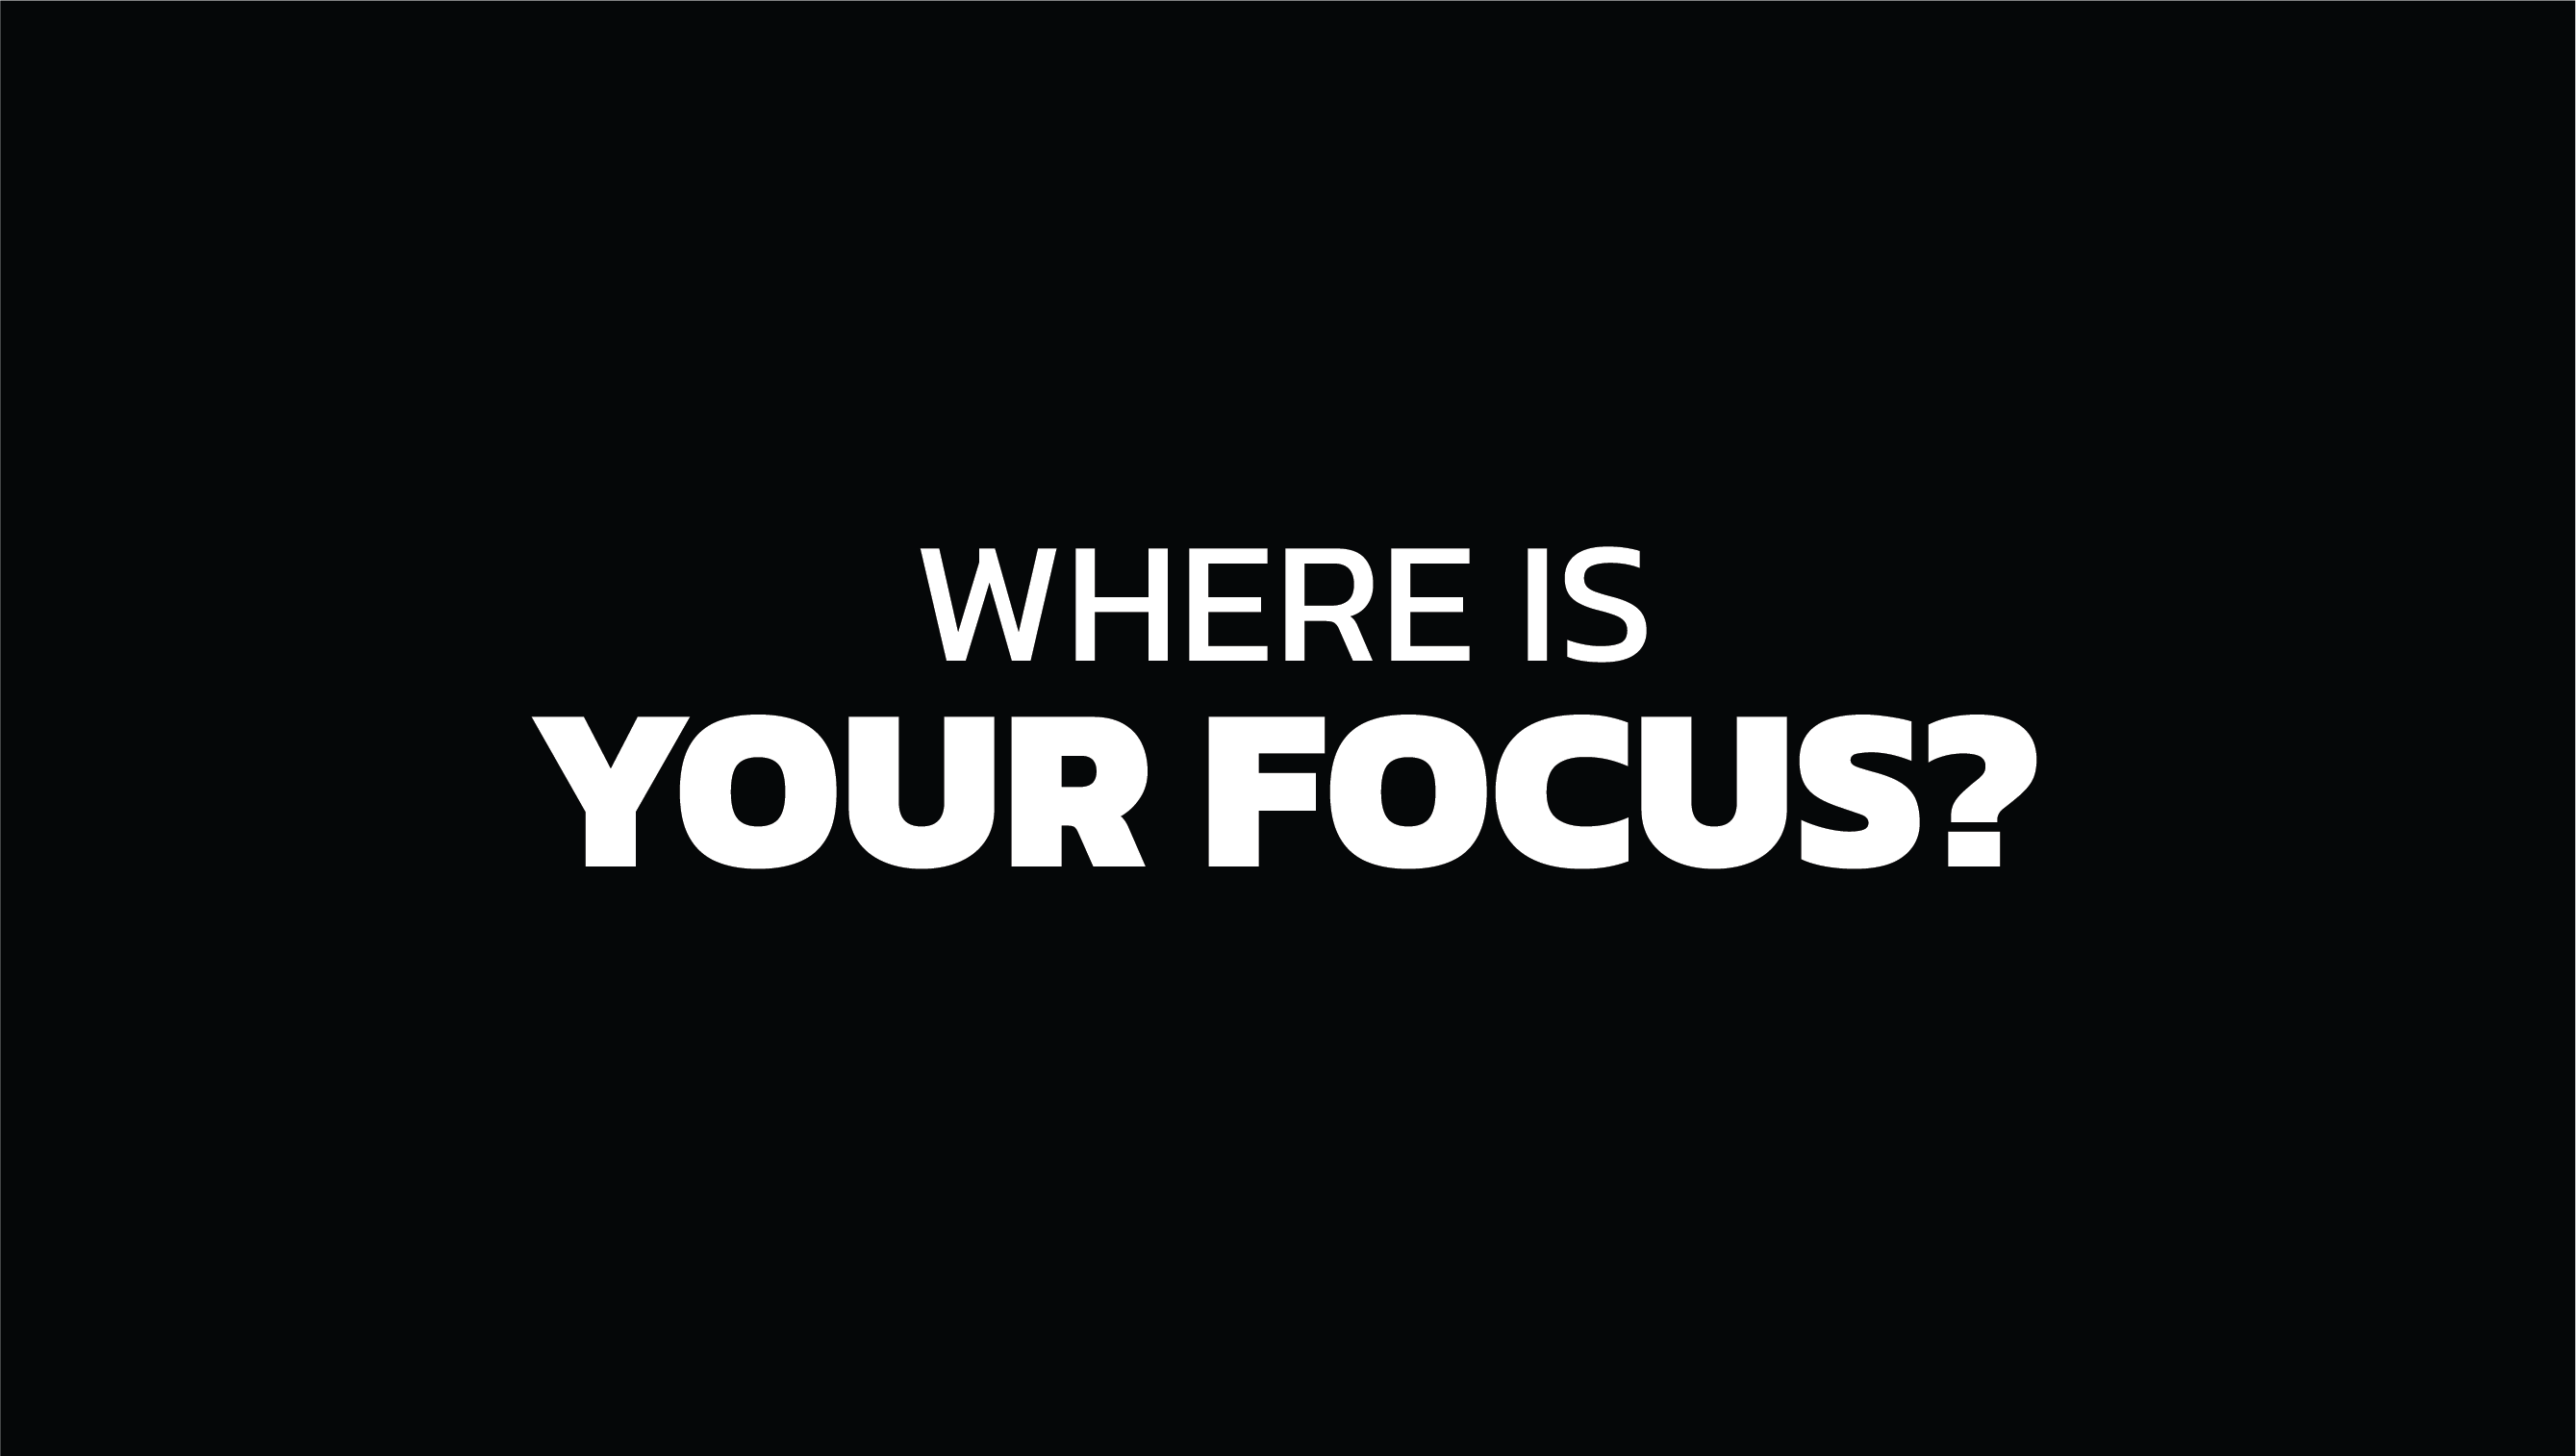 Where is your focus?